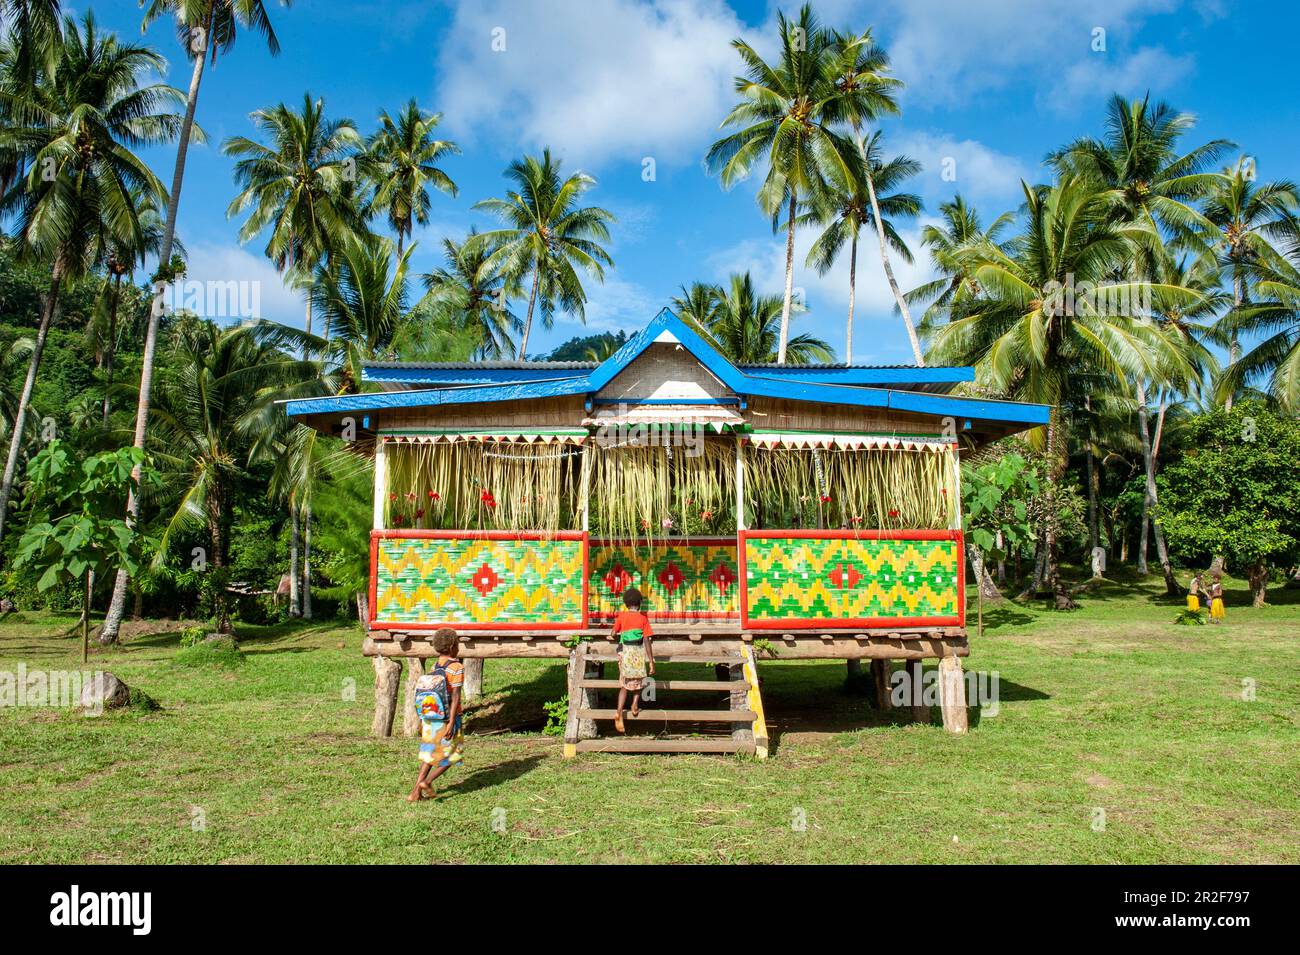 Two people enter a Selzen house with bright colors and patterns in a grassy landscape surrounded by palm trees, Garove Island, Vitu Islands, West New Stock Photo